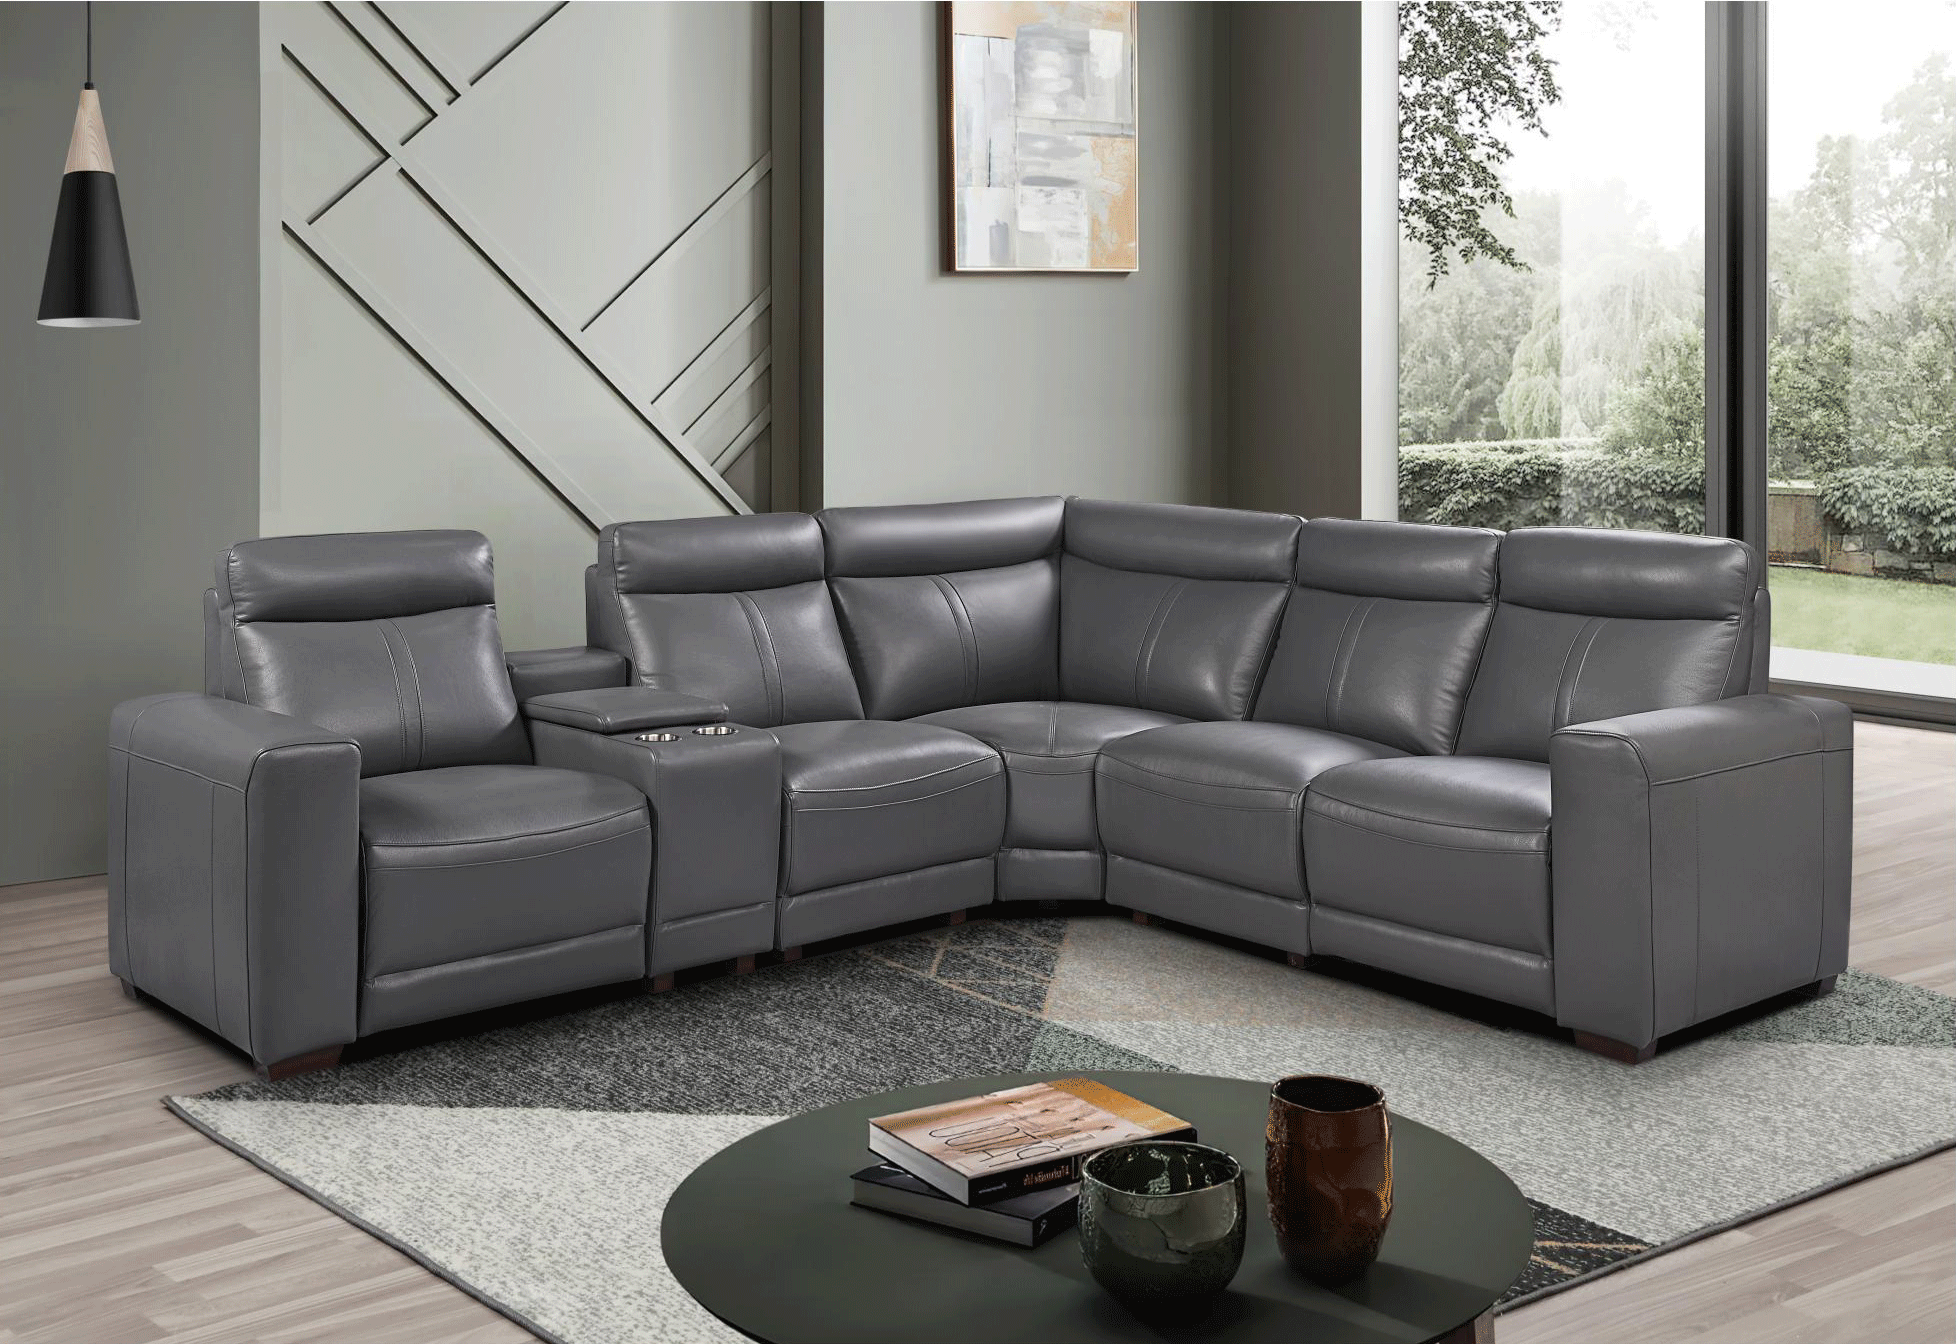 Brands ALF Capri Coffee Tables, Italy 2777 Sectional w/ recliners